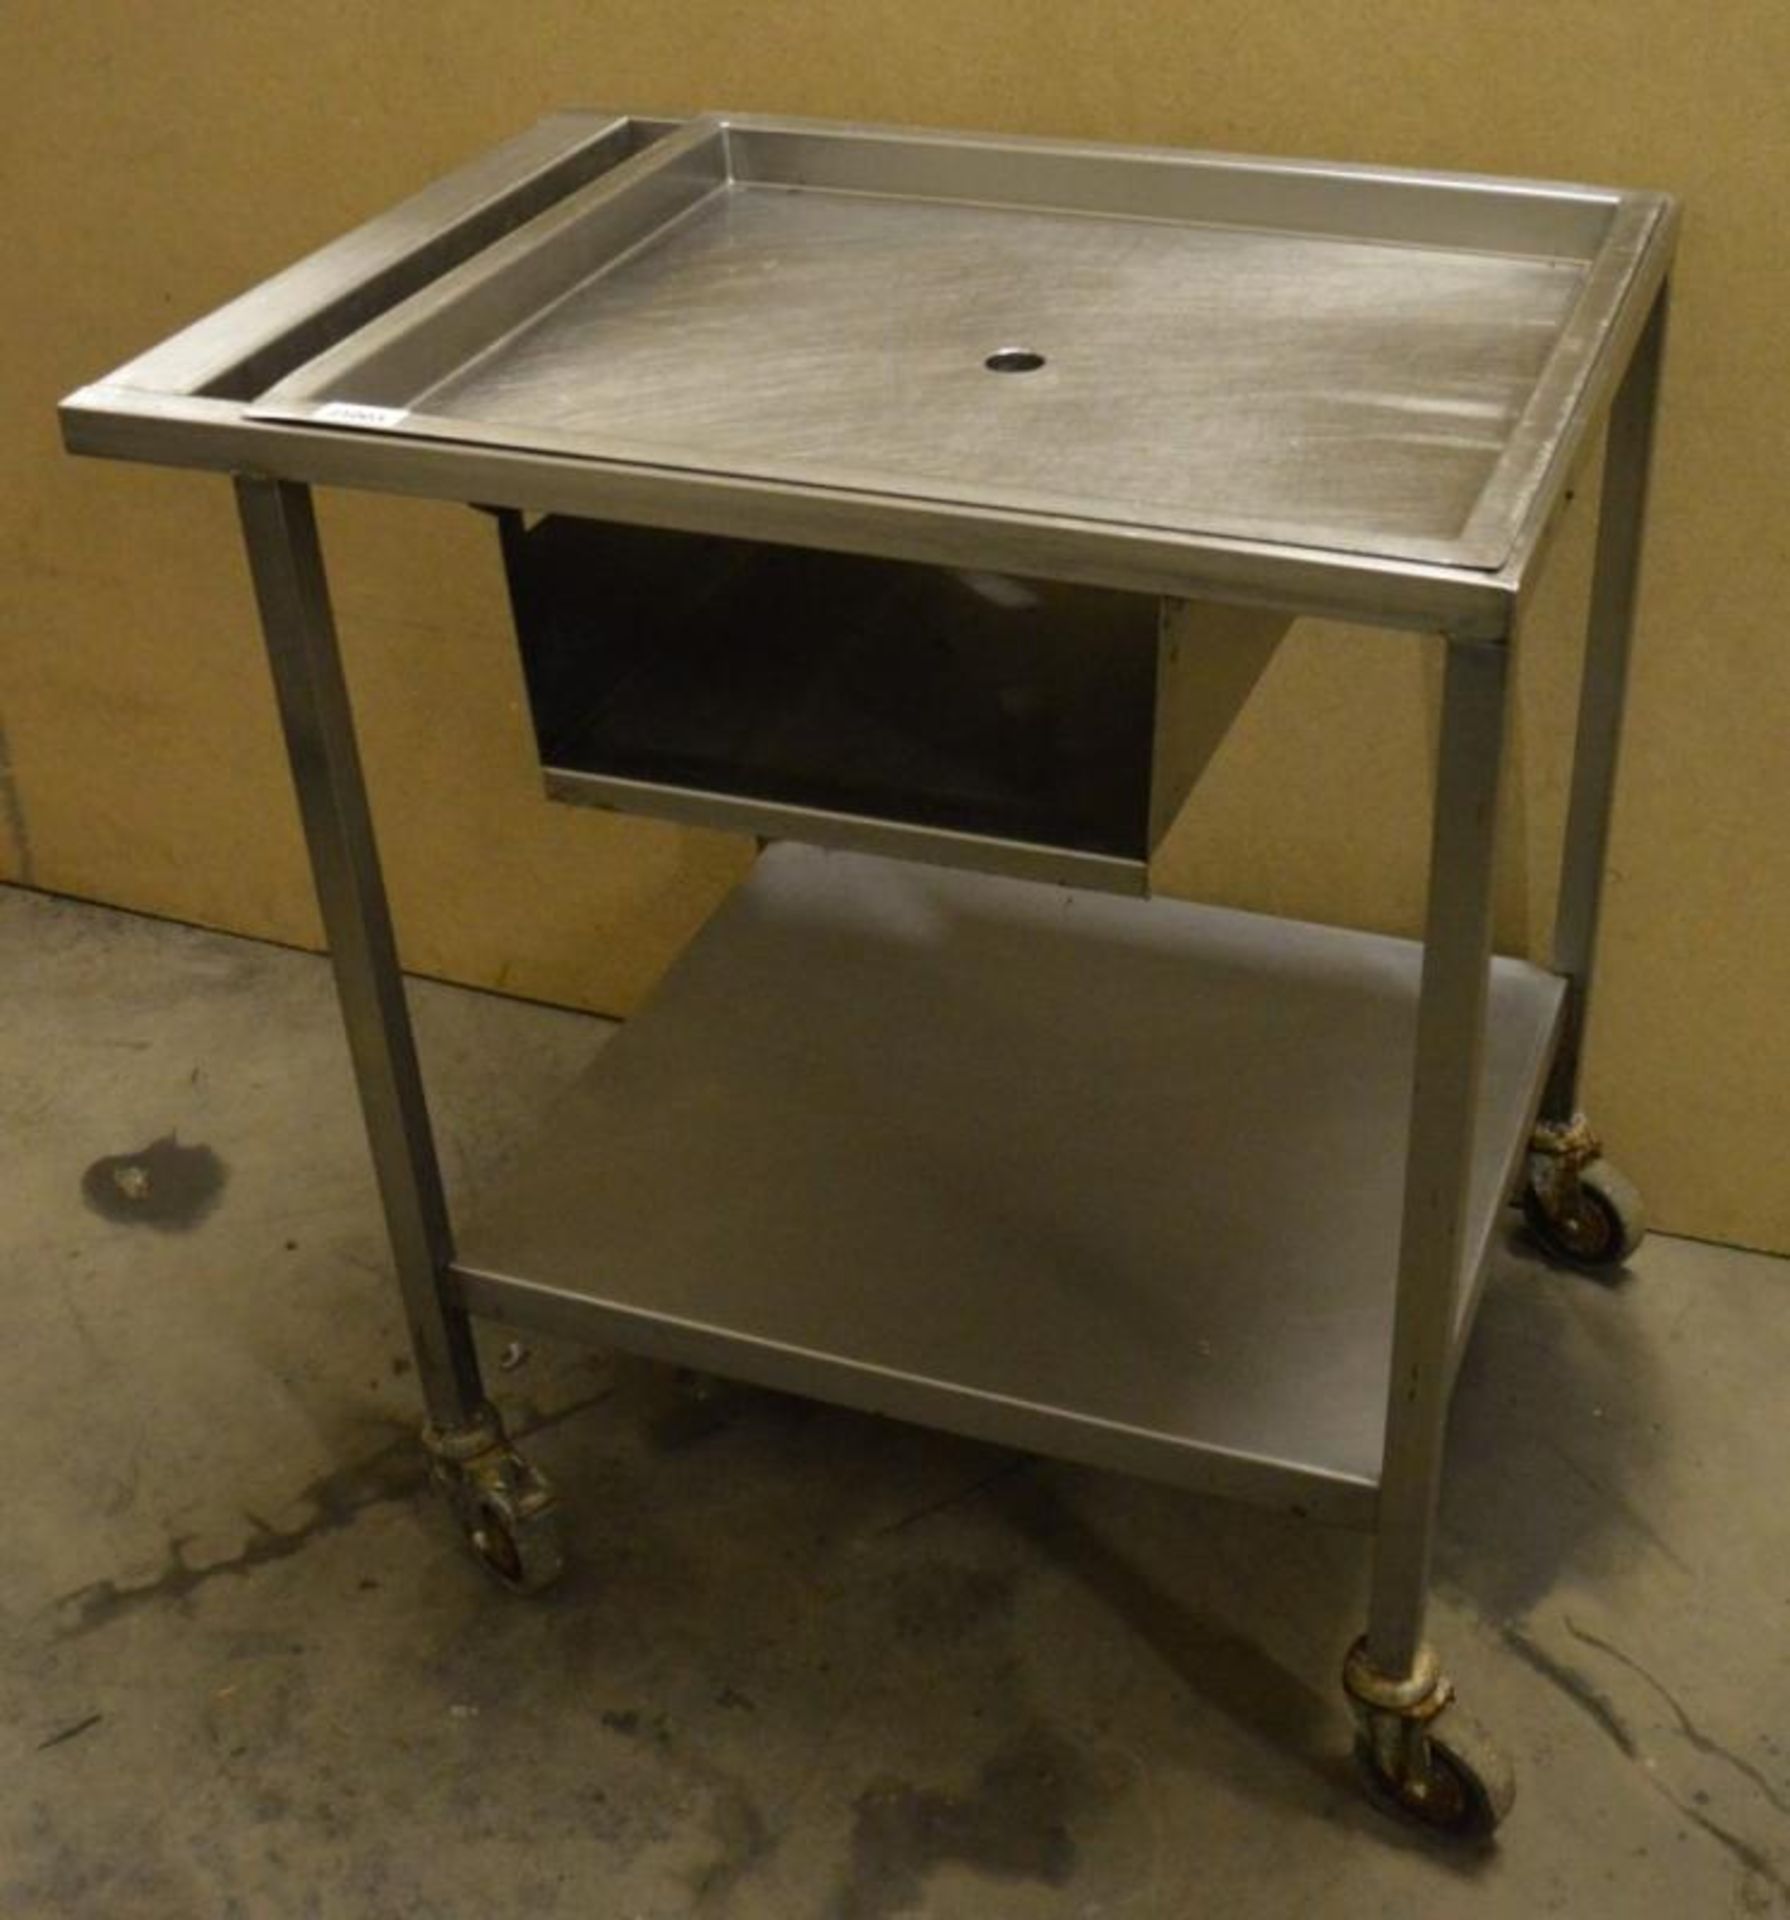 1 x Wheeled Stainless Steel Prep Bench with Drain Hole - Dimensions: 81.5 x 60.5 x 88cm - Ref: J1003